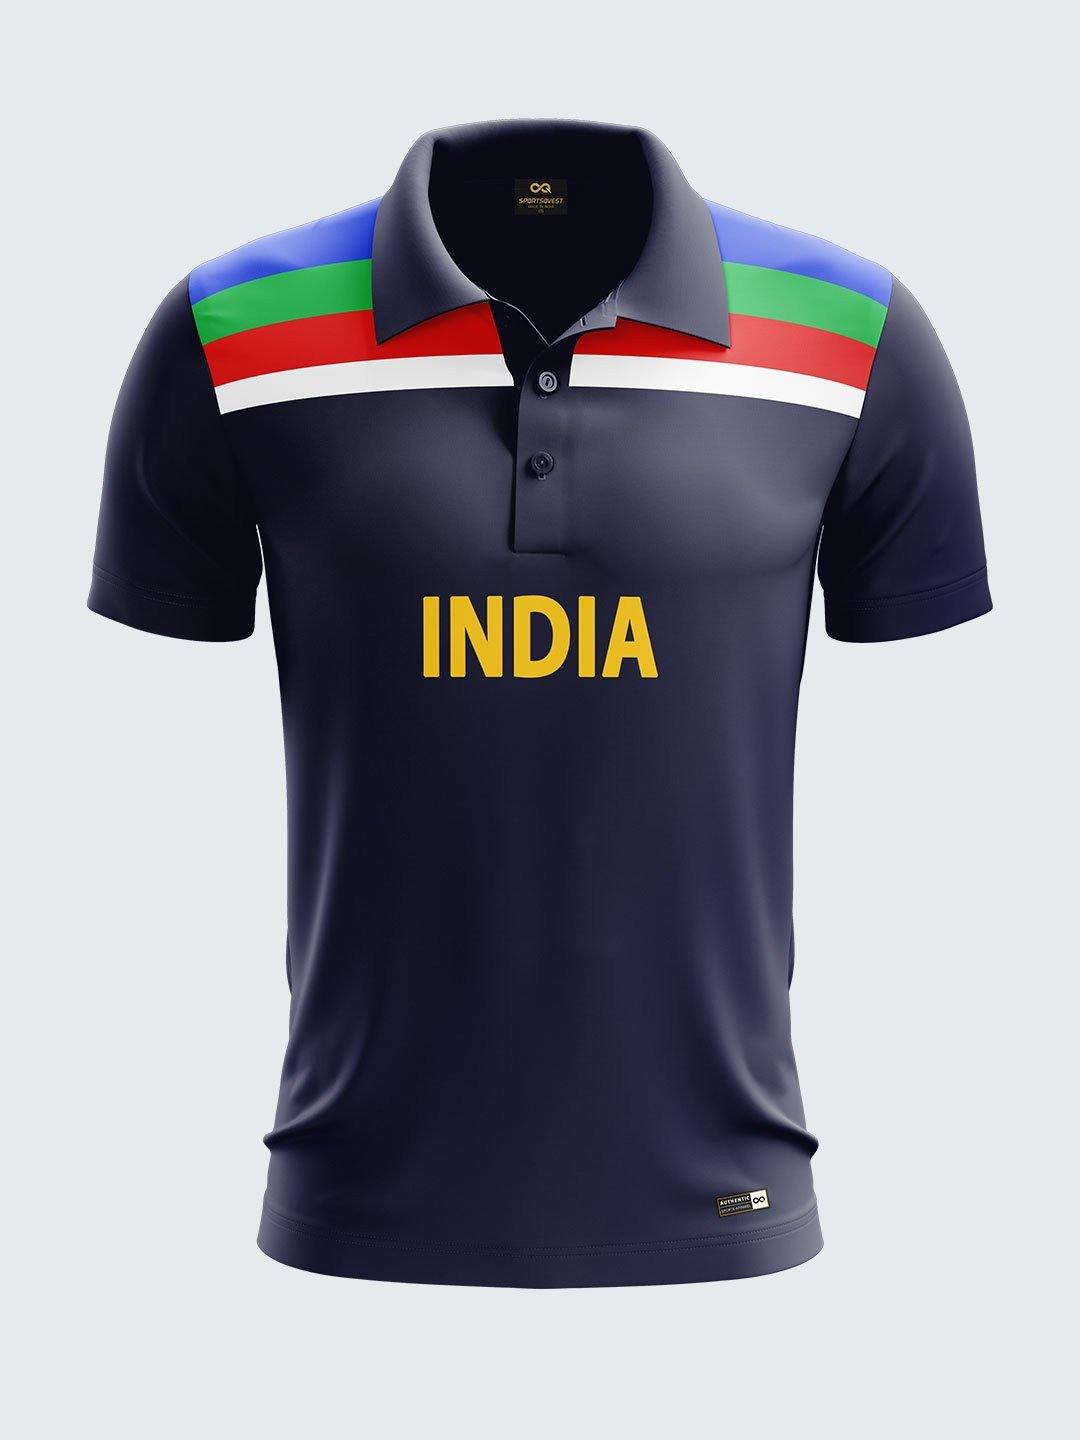 indian cricket team jersey in 1992 world cup